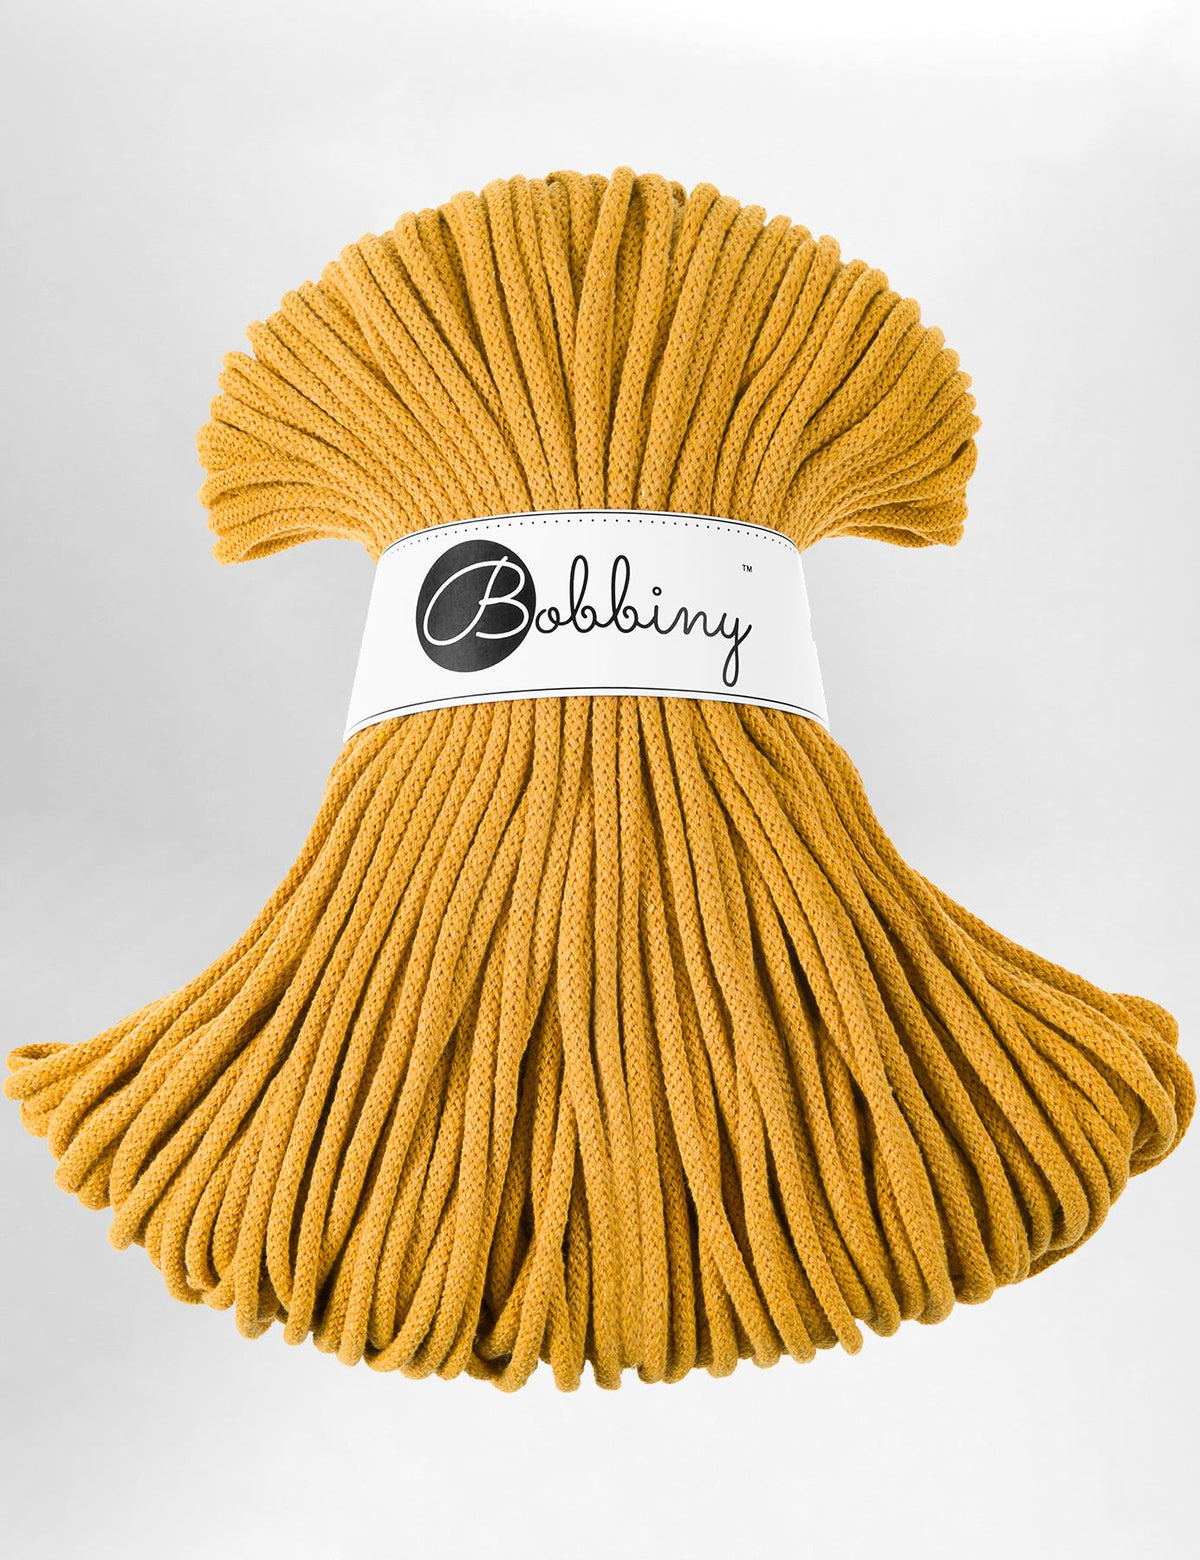 5mm Mustard recycled cotton macrame cord by Bobbiny (100m)